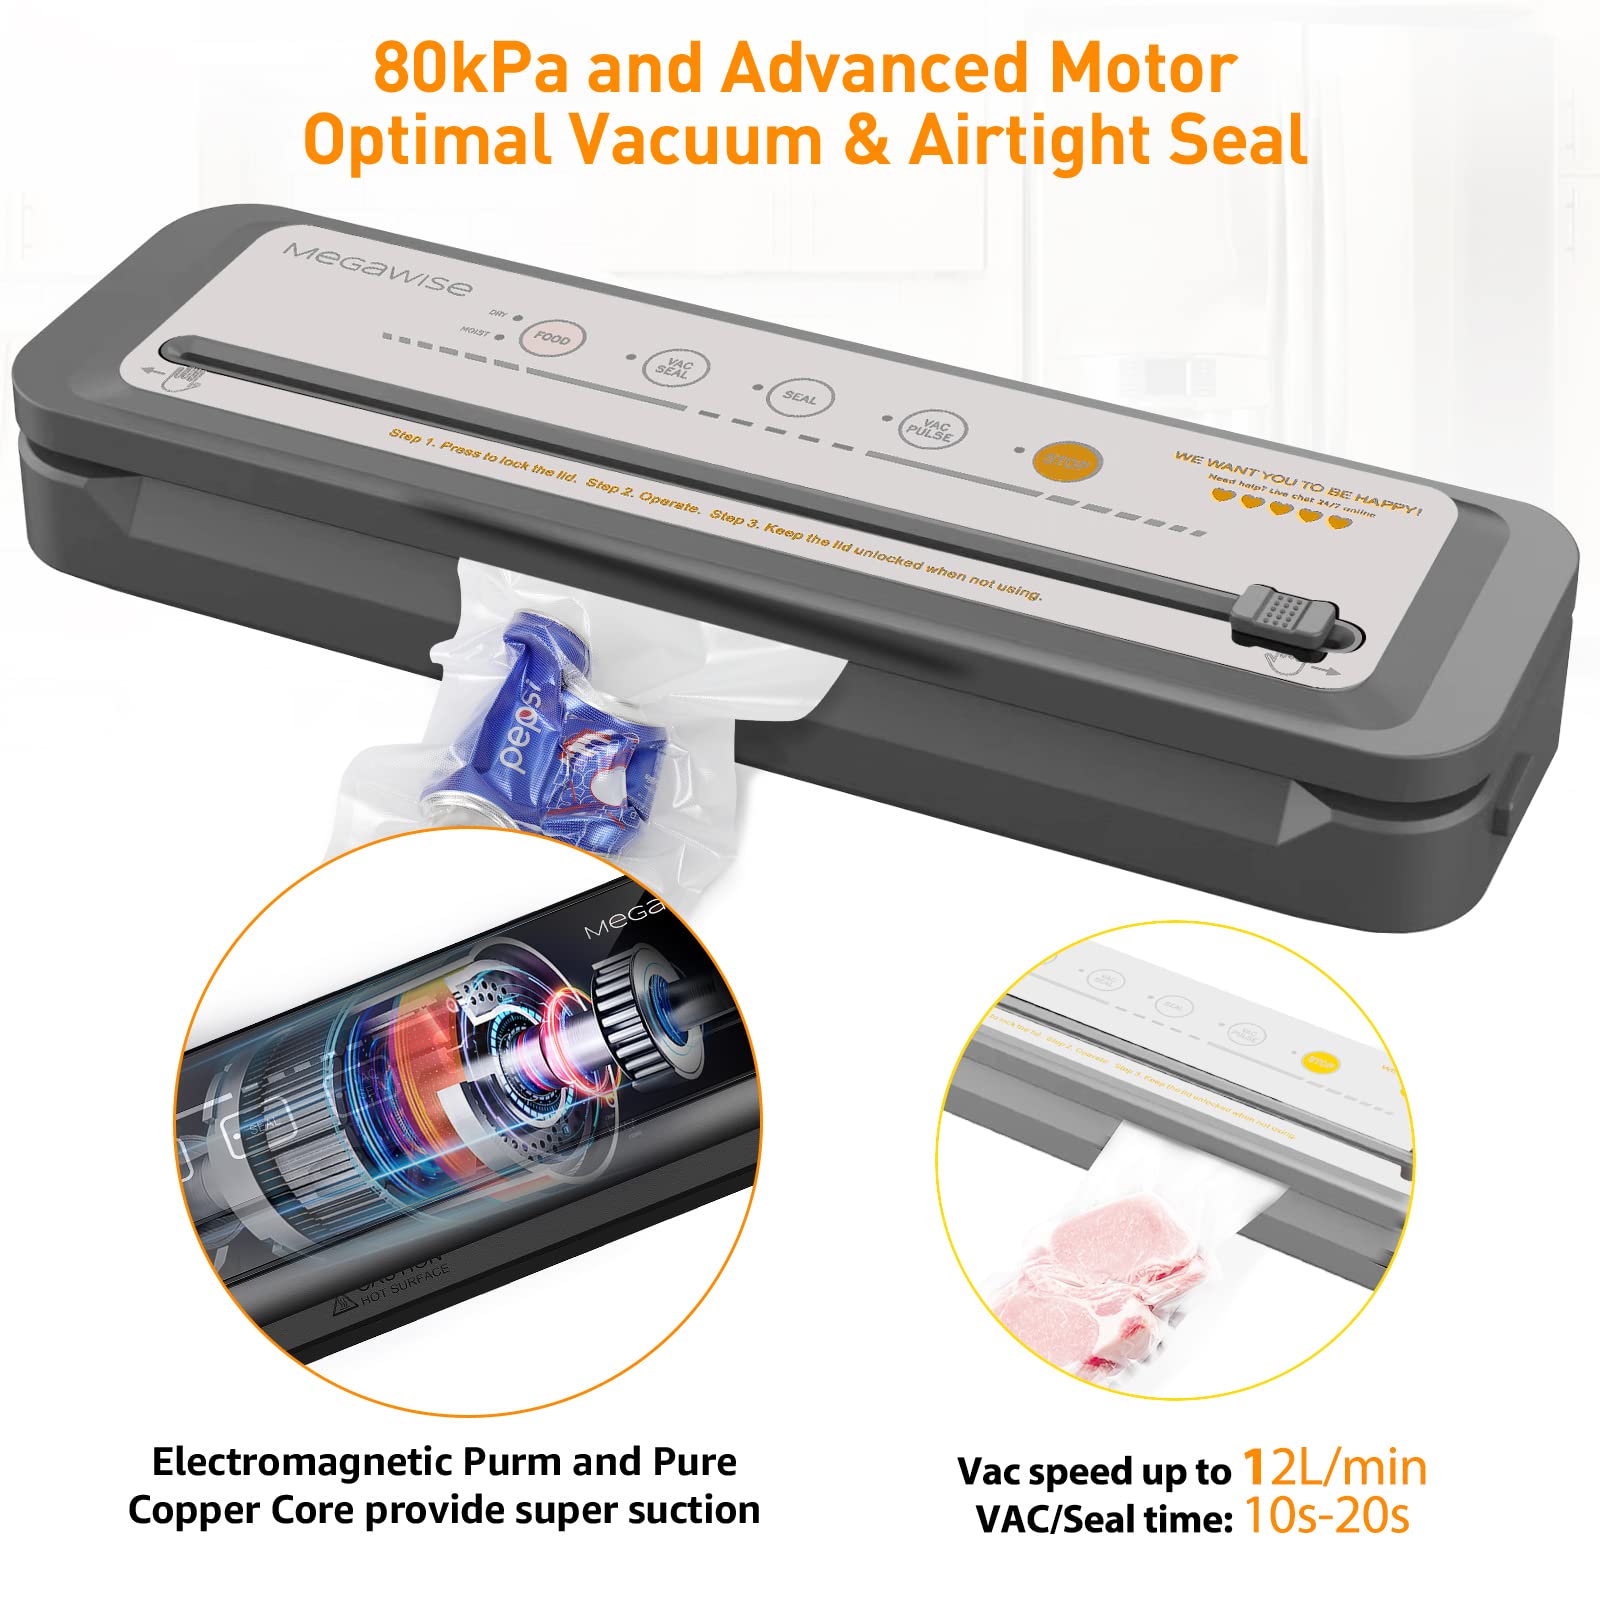 MegaWise Powerful but Compact Vacuum Sealer Machine (Silver)